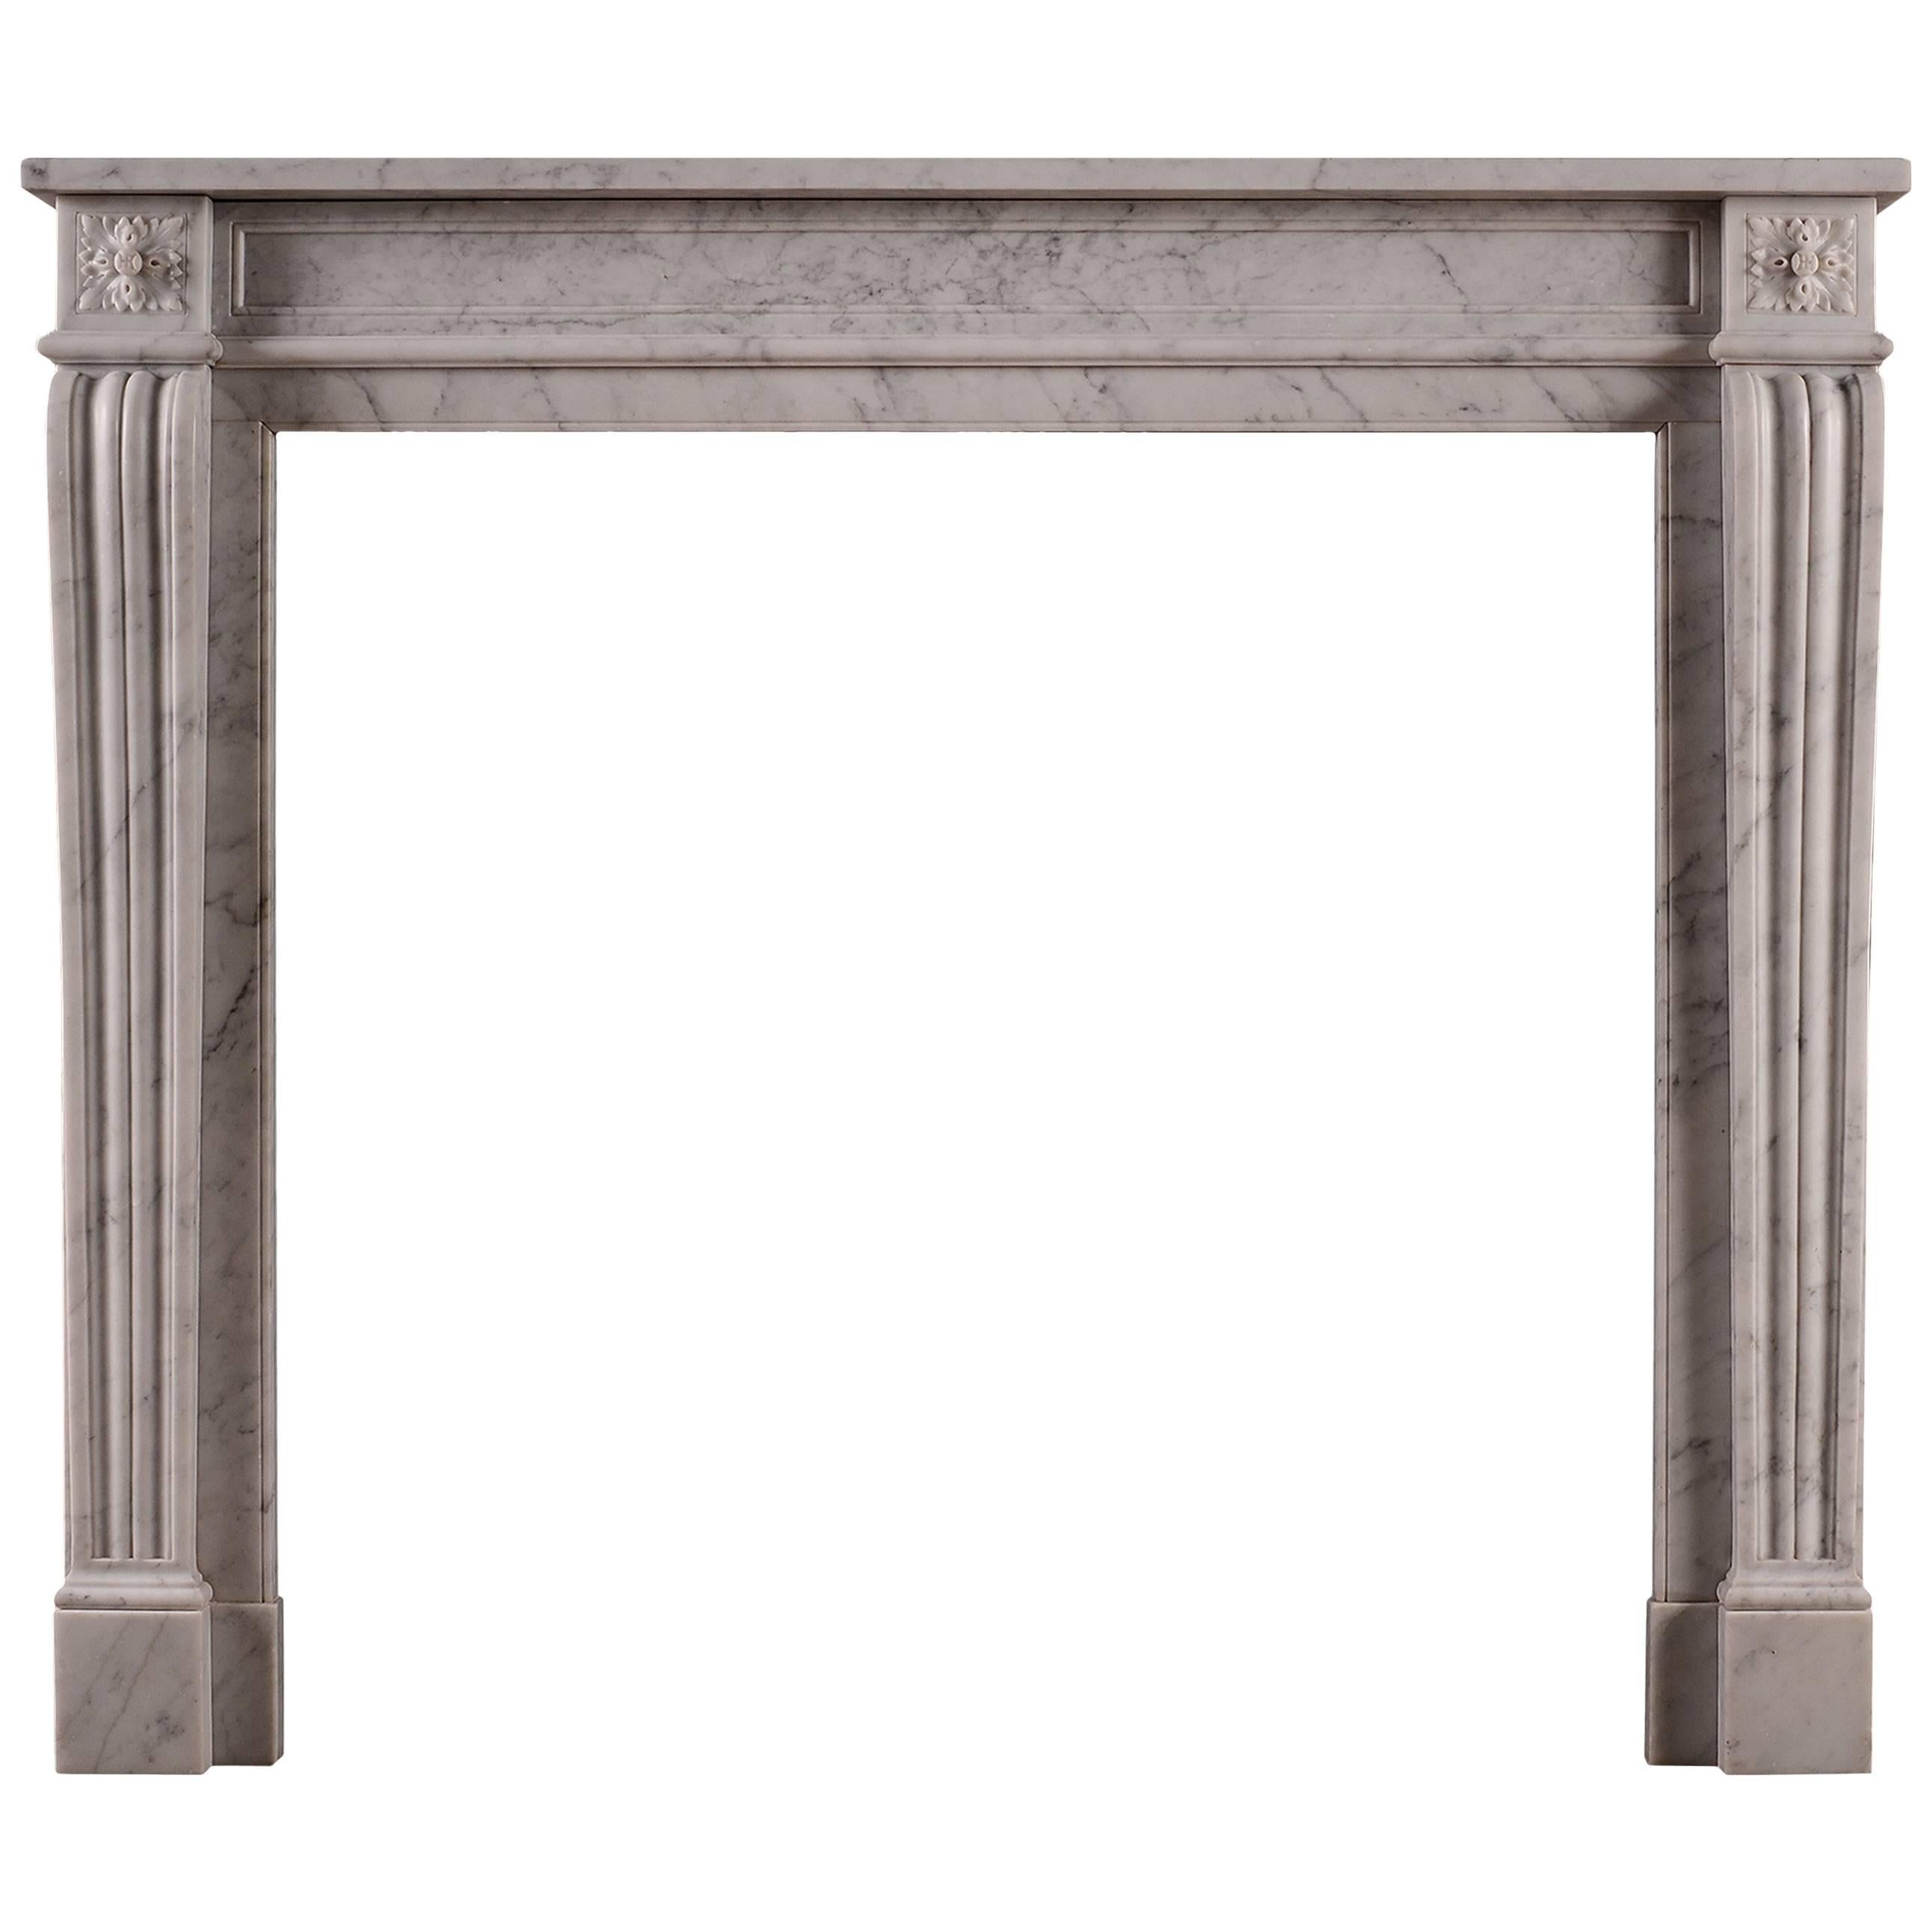 19th Century Carved Marble Fireplace in the Louis XVI Style